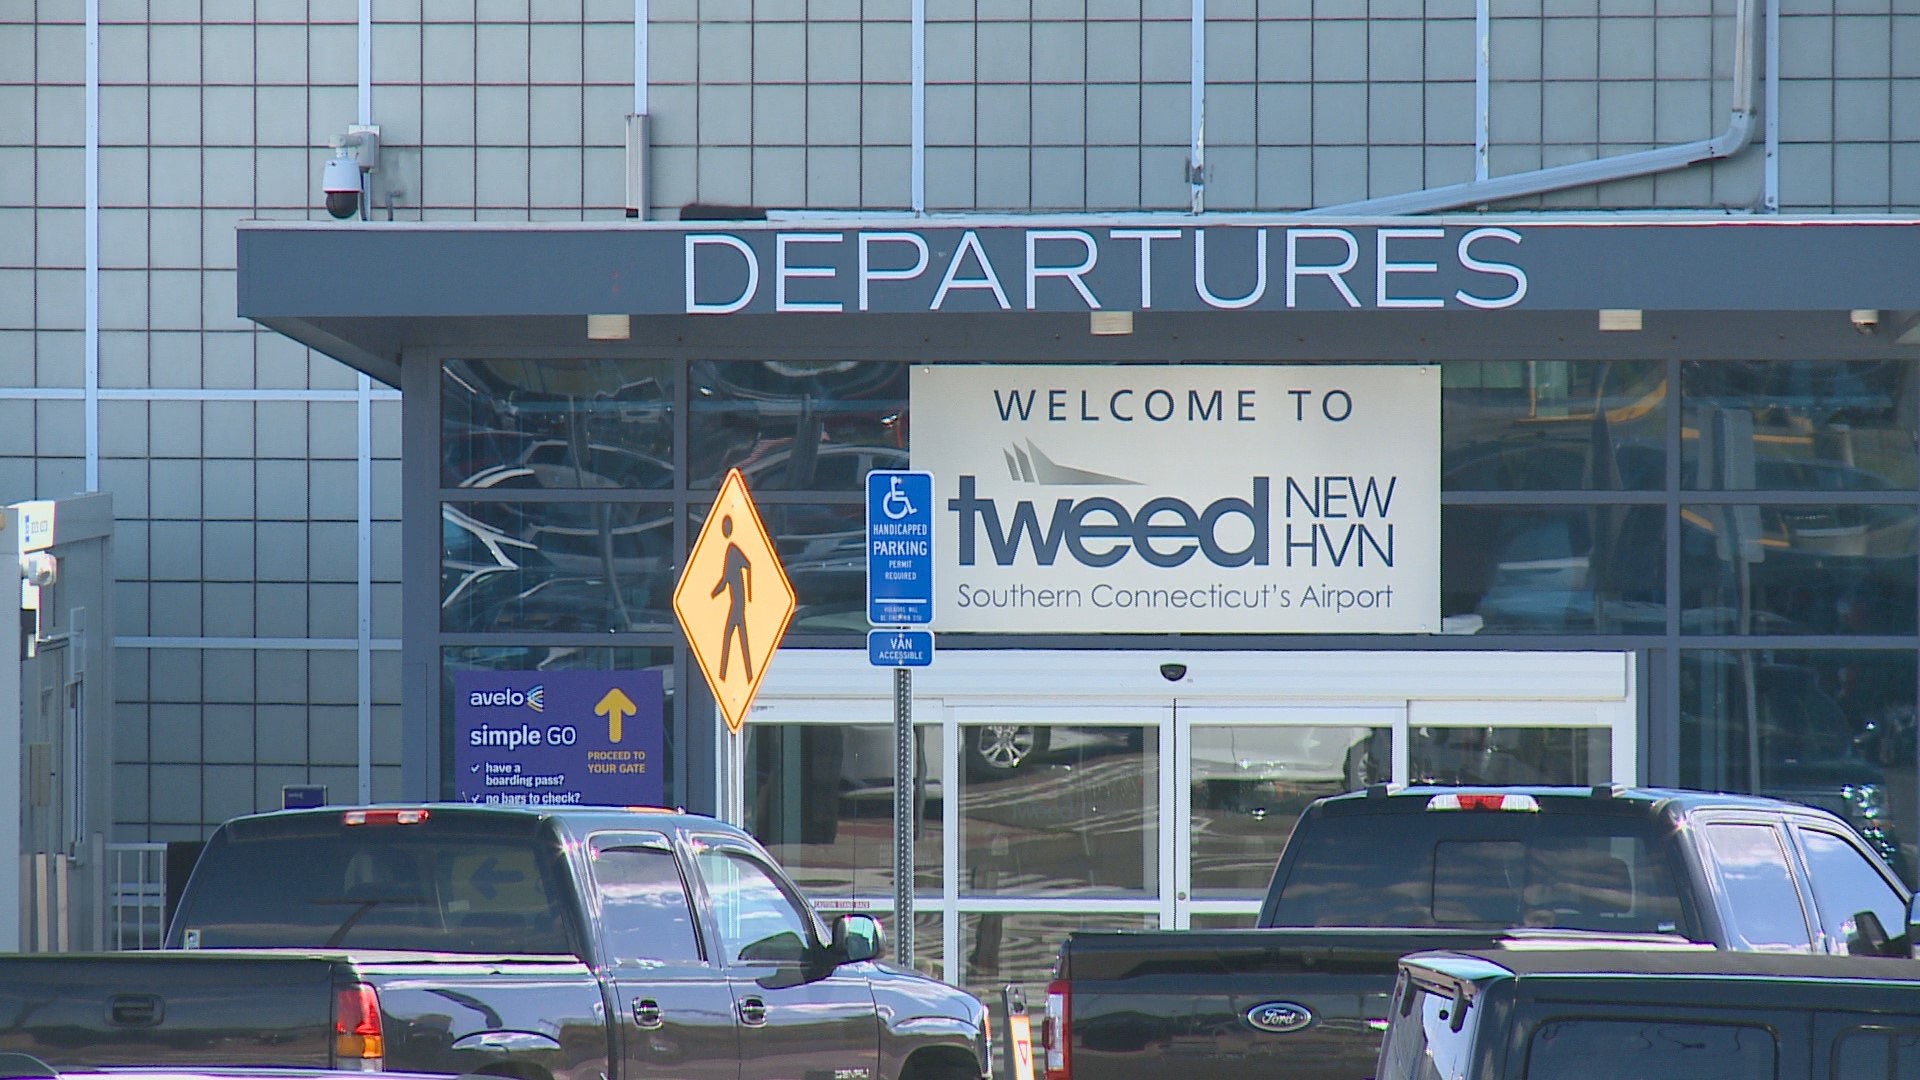 The Board of Directors for Tweed New Haven Airport has voted to sign a new lease with Avports, which means plans for expansions are on the horizon.